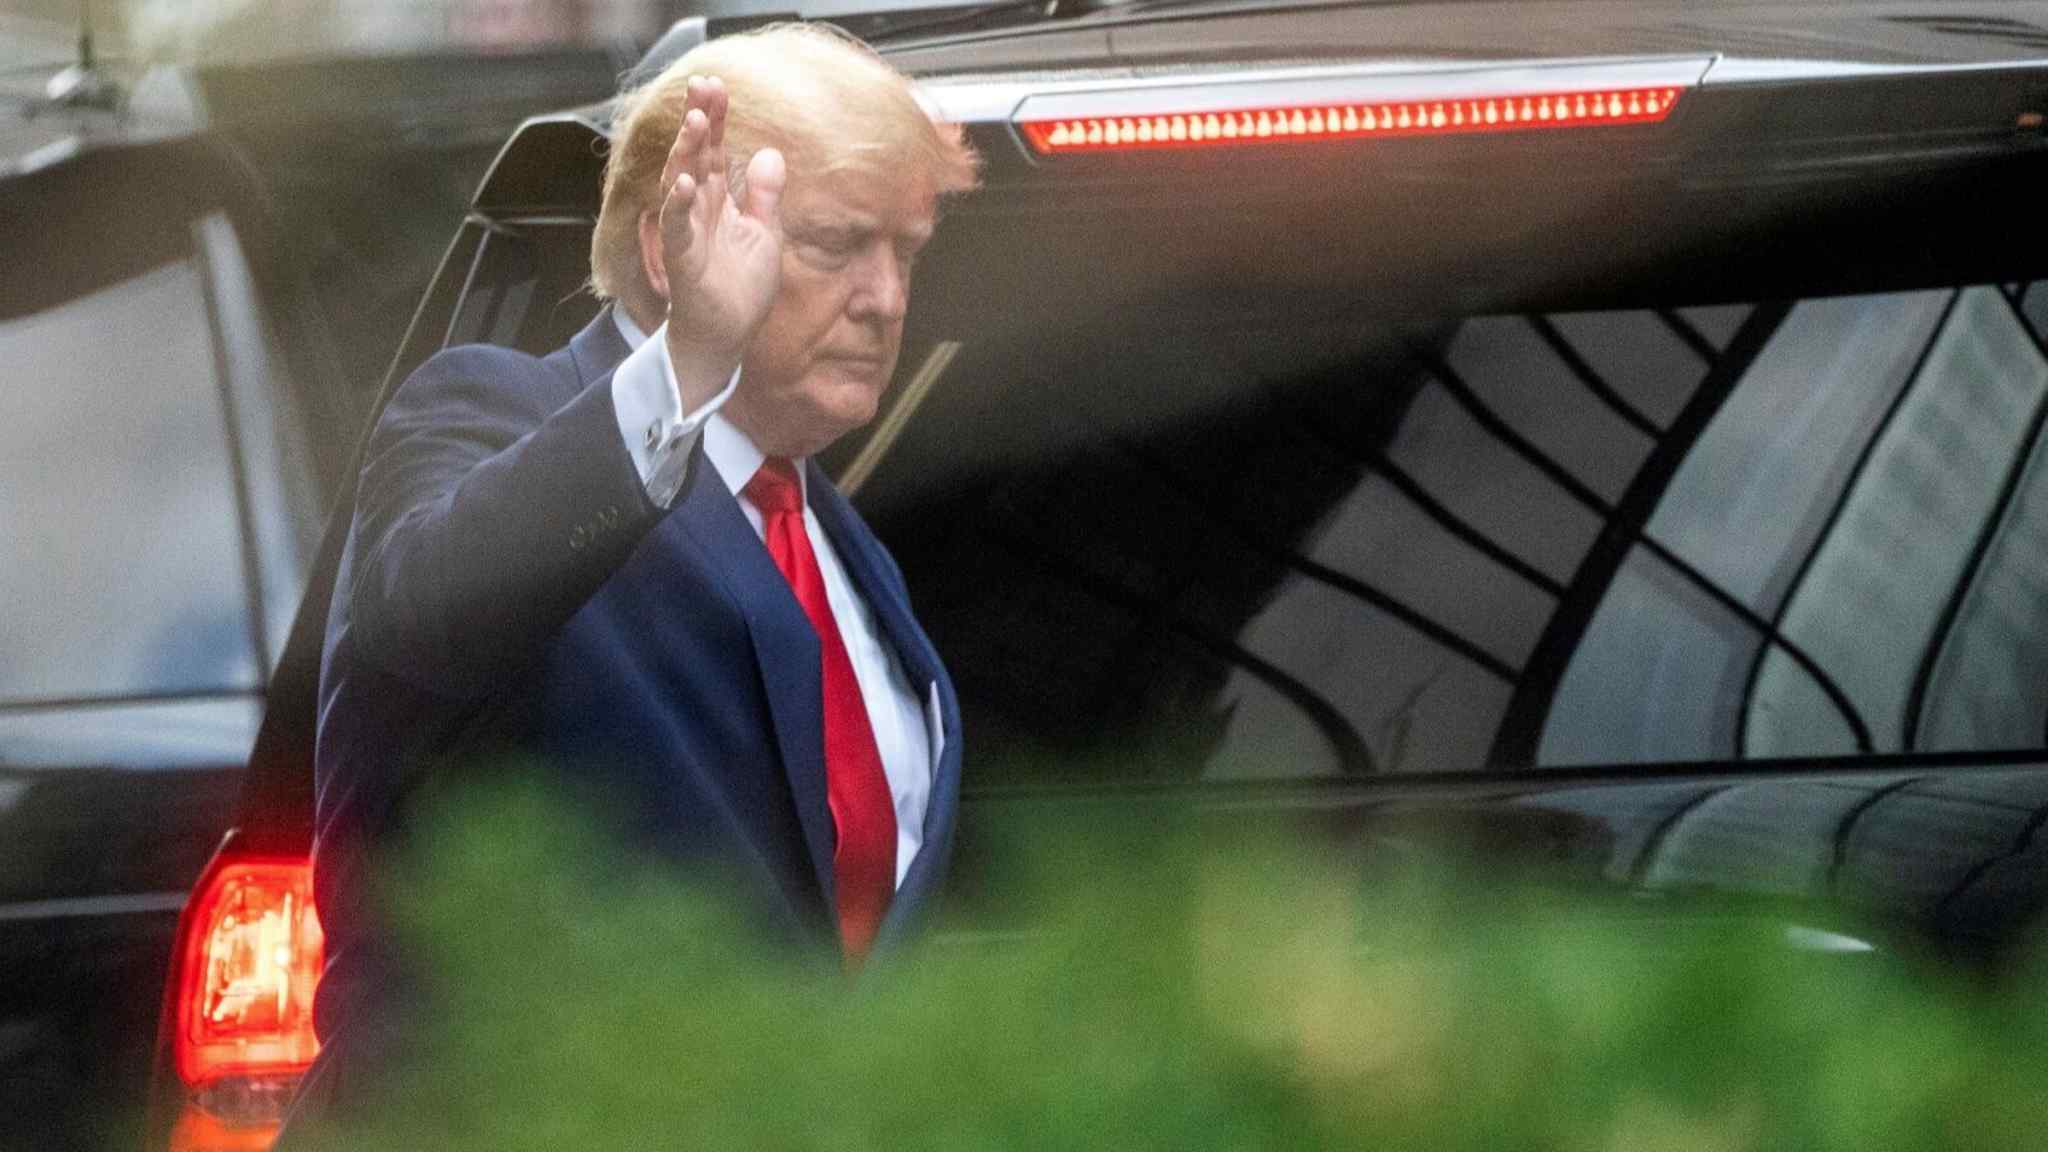 ‘Very real and very serious’: Trump in legal crosshairs over seized documents